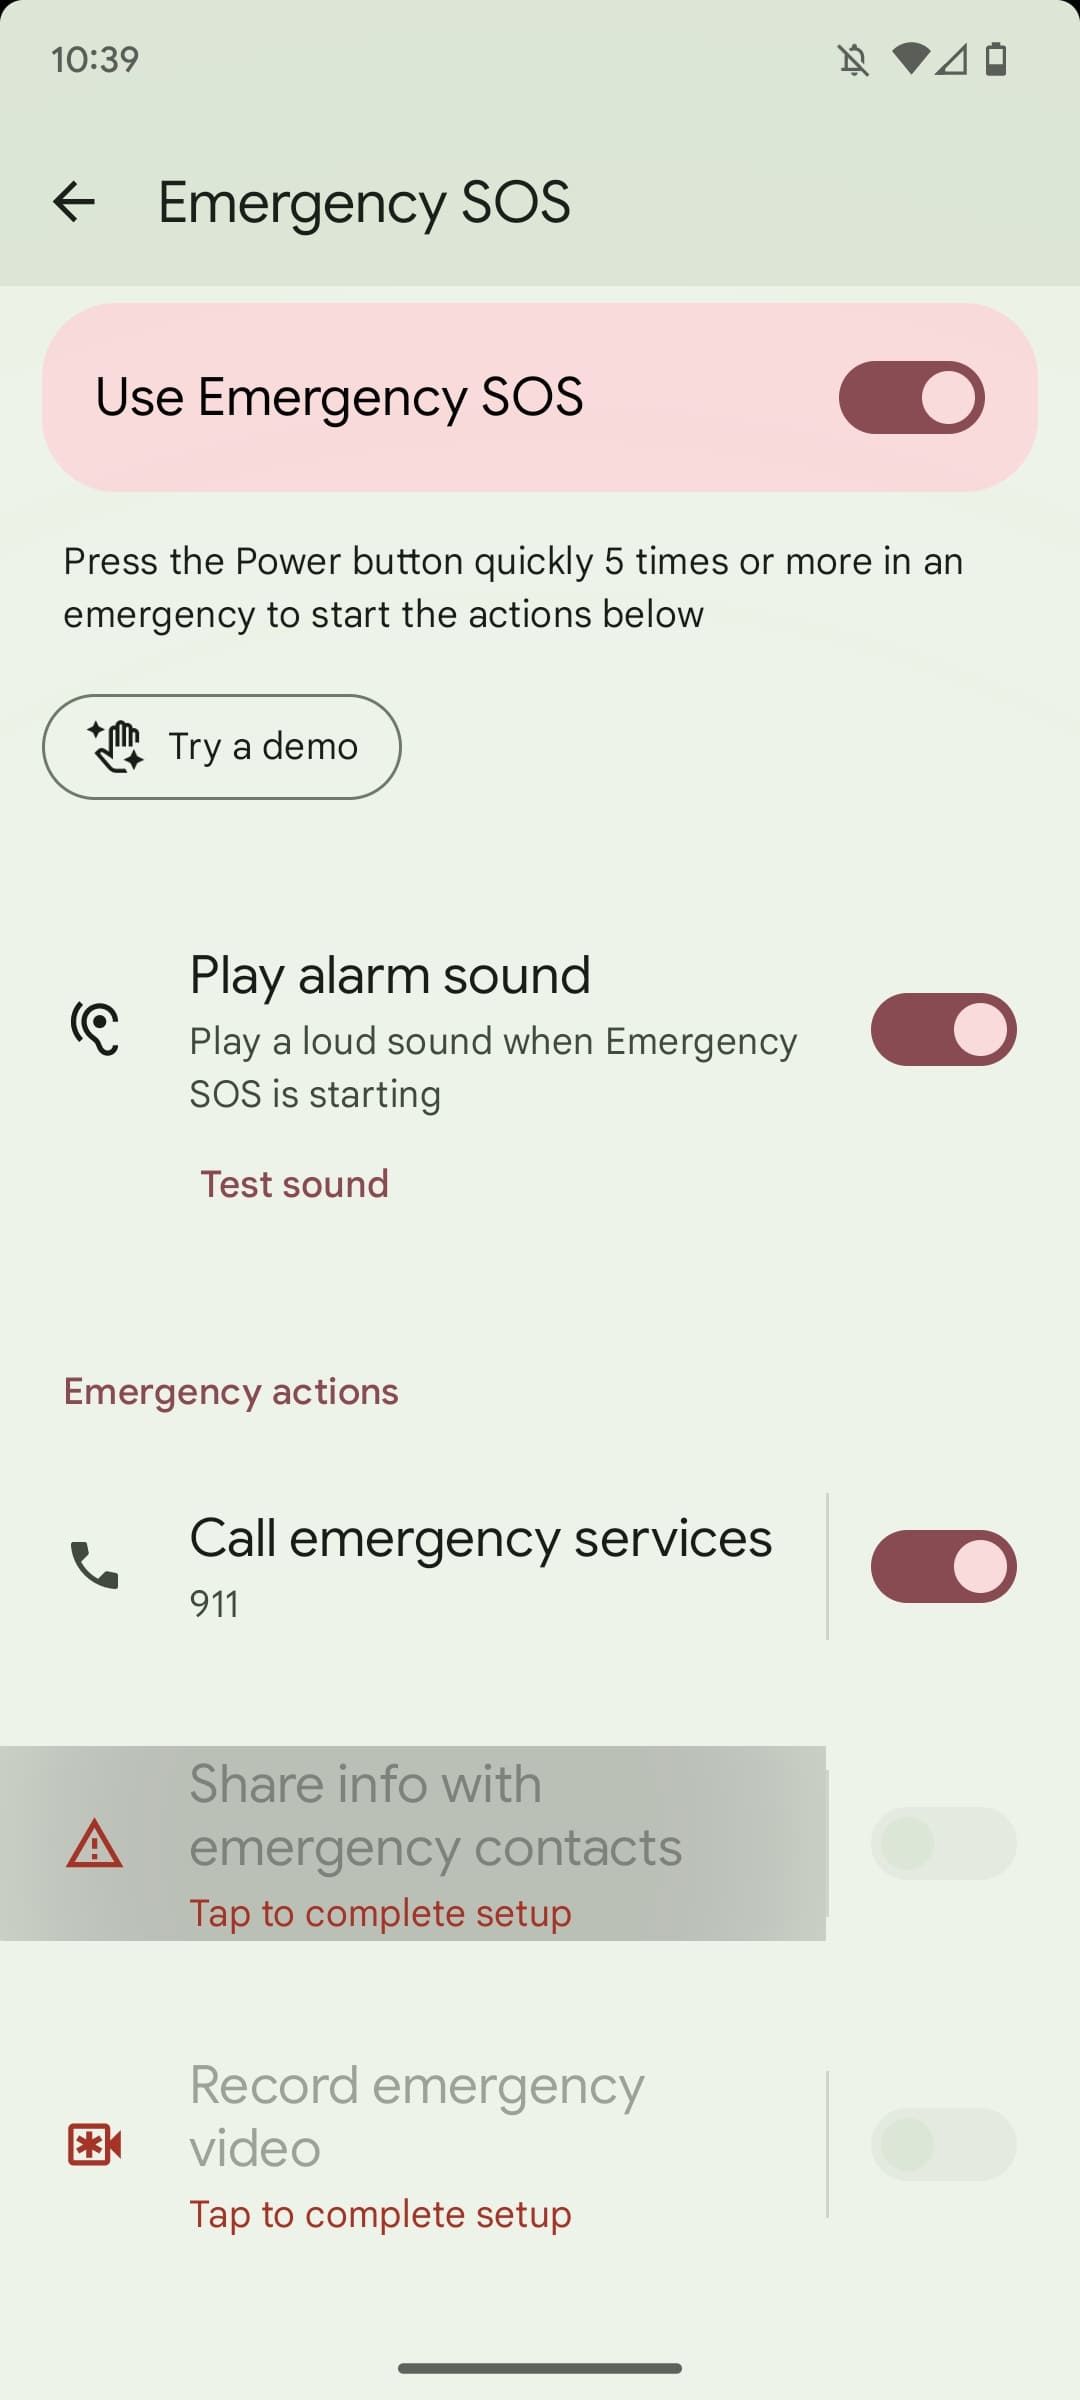 share information with emergency contacts